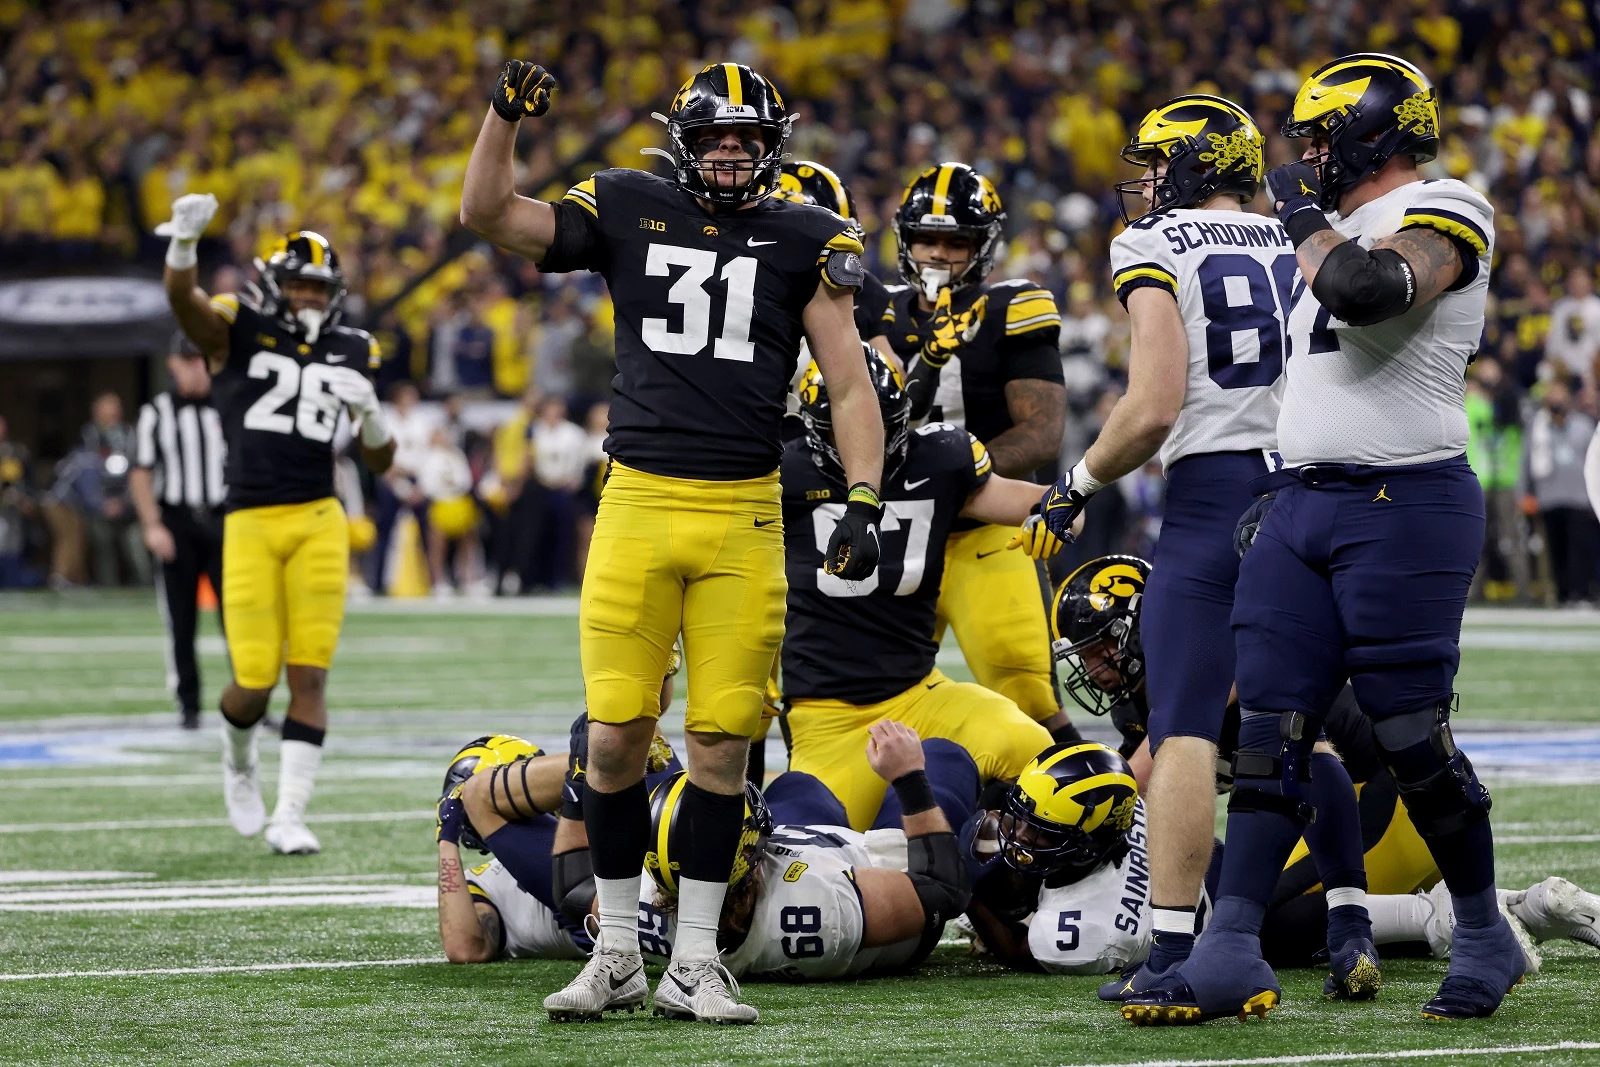 More honors for Hawkeyes' Campbell